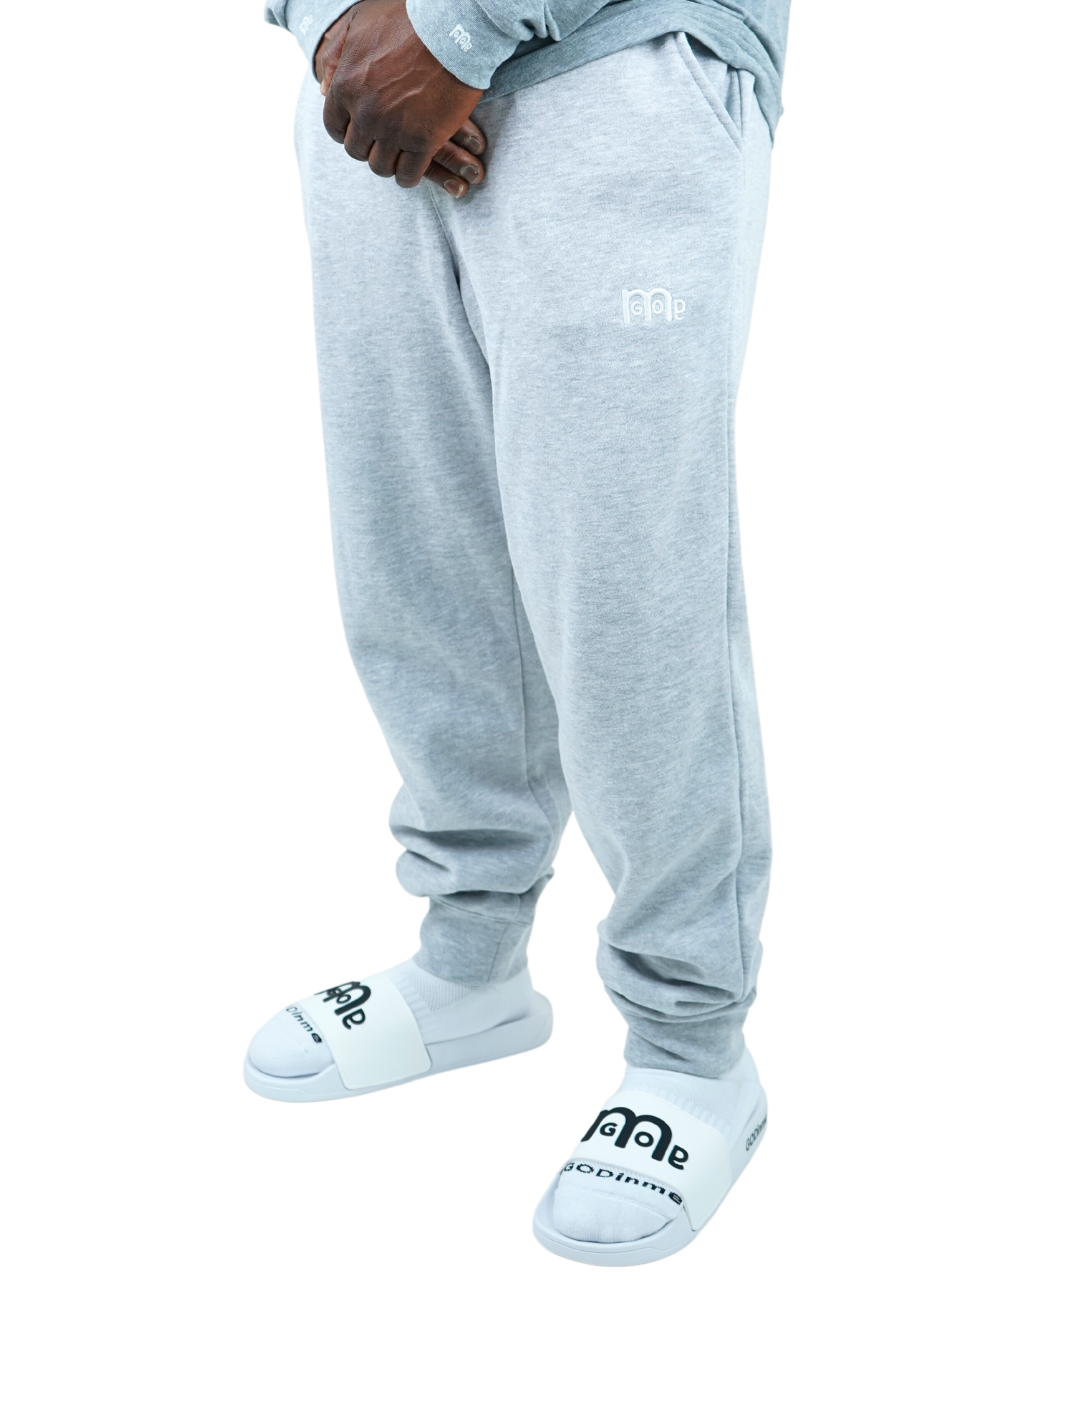 Experience the ultimate comfort in Men's joggers with GODinme! Made with premium quality fabric, these Grey GODinme sweat pants offer an elastic waistband for that perfectly relaxed fit. Featuring ribbing ankle cuffs, sewn eyelets, and the signature GODinme logo (in White) at left leg.